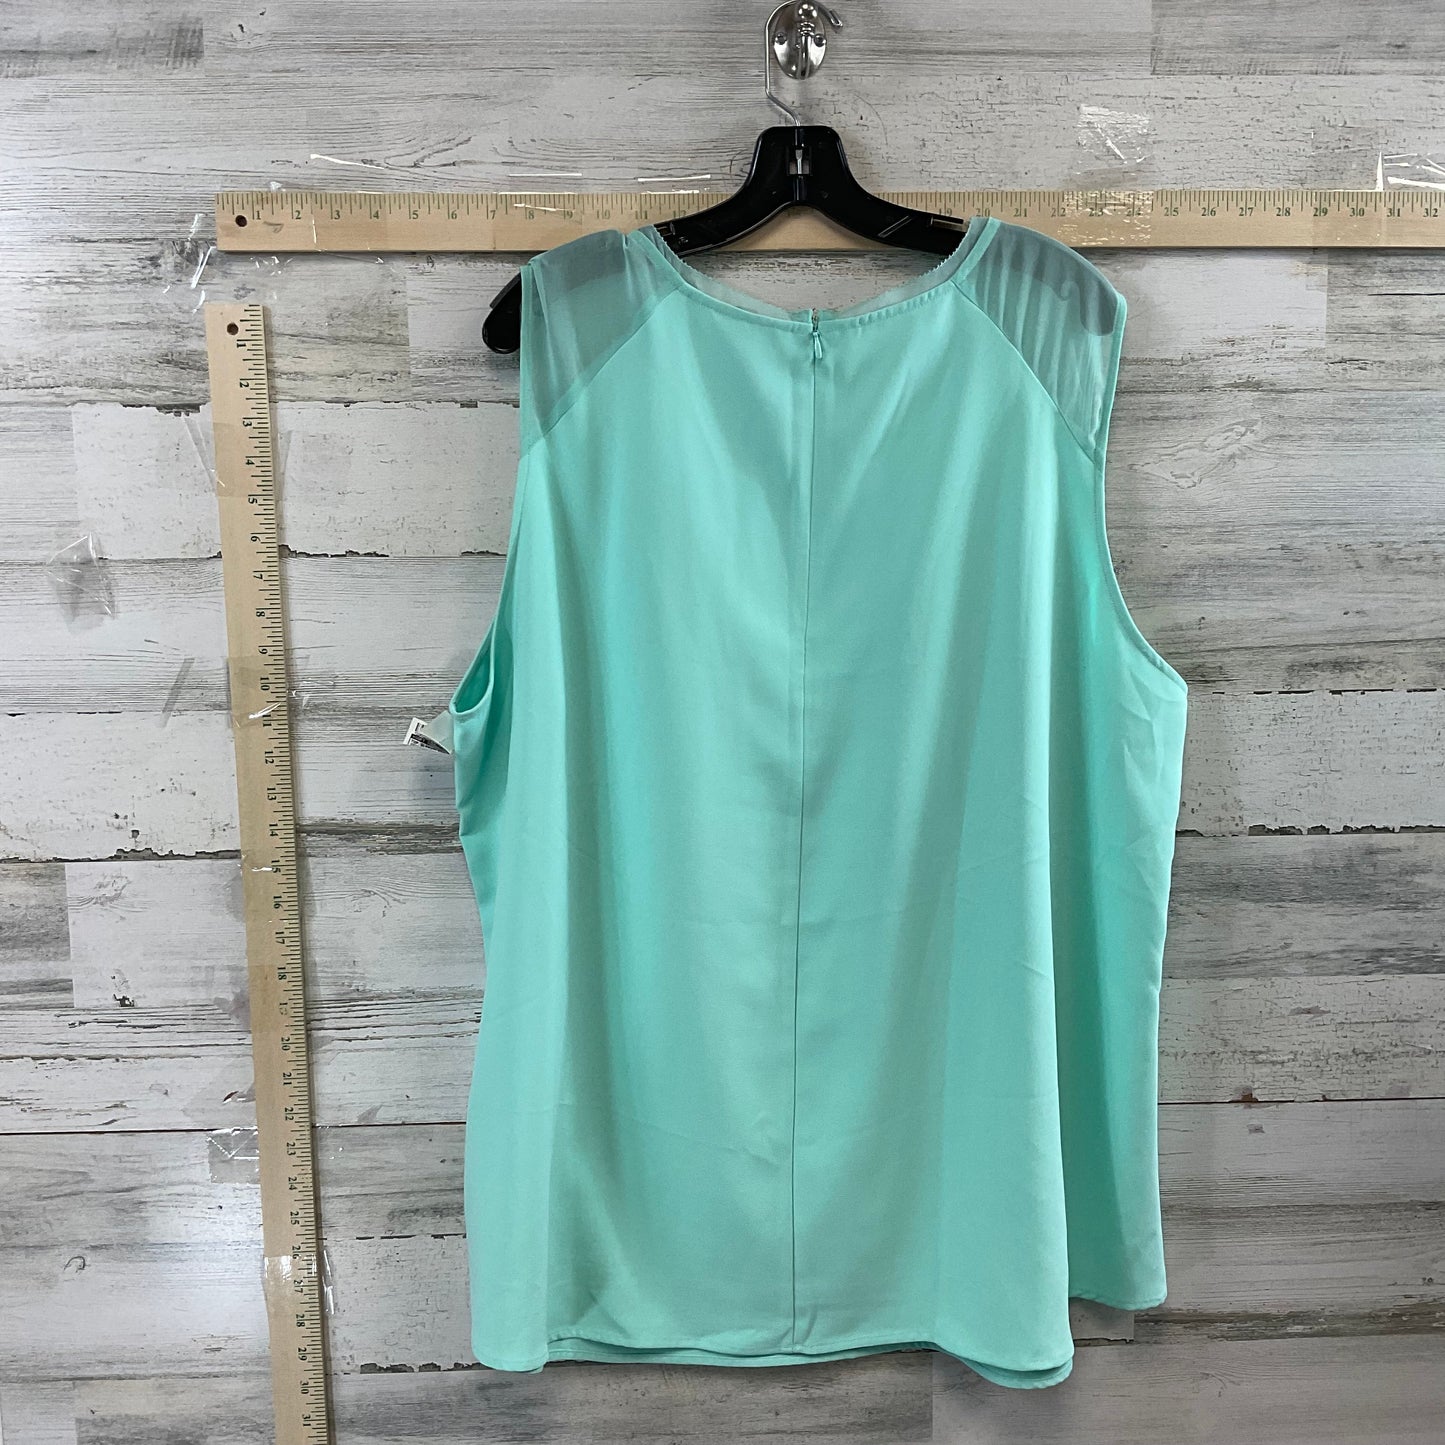 Top Sleeveless By Soft Surroundings  Size: 3x